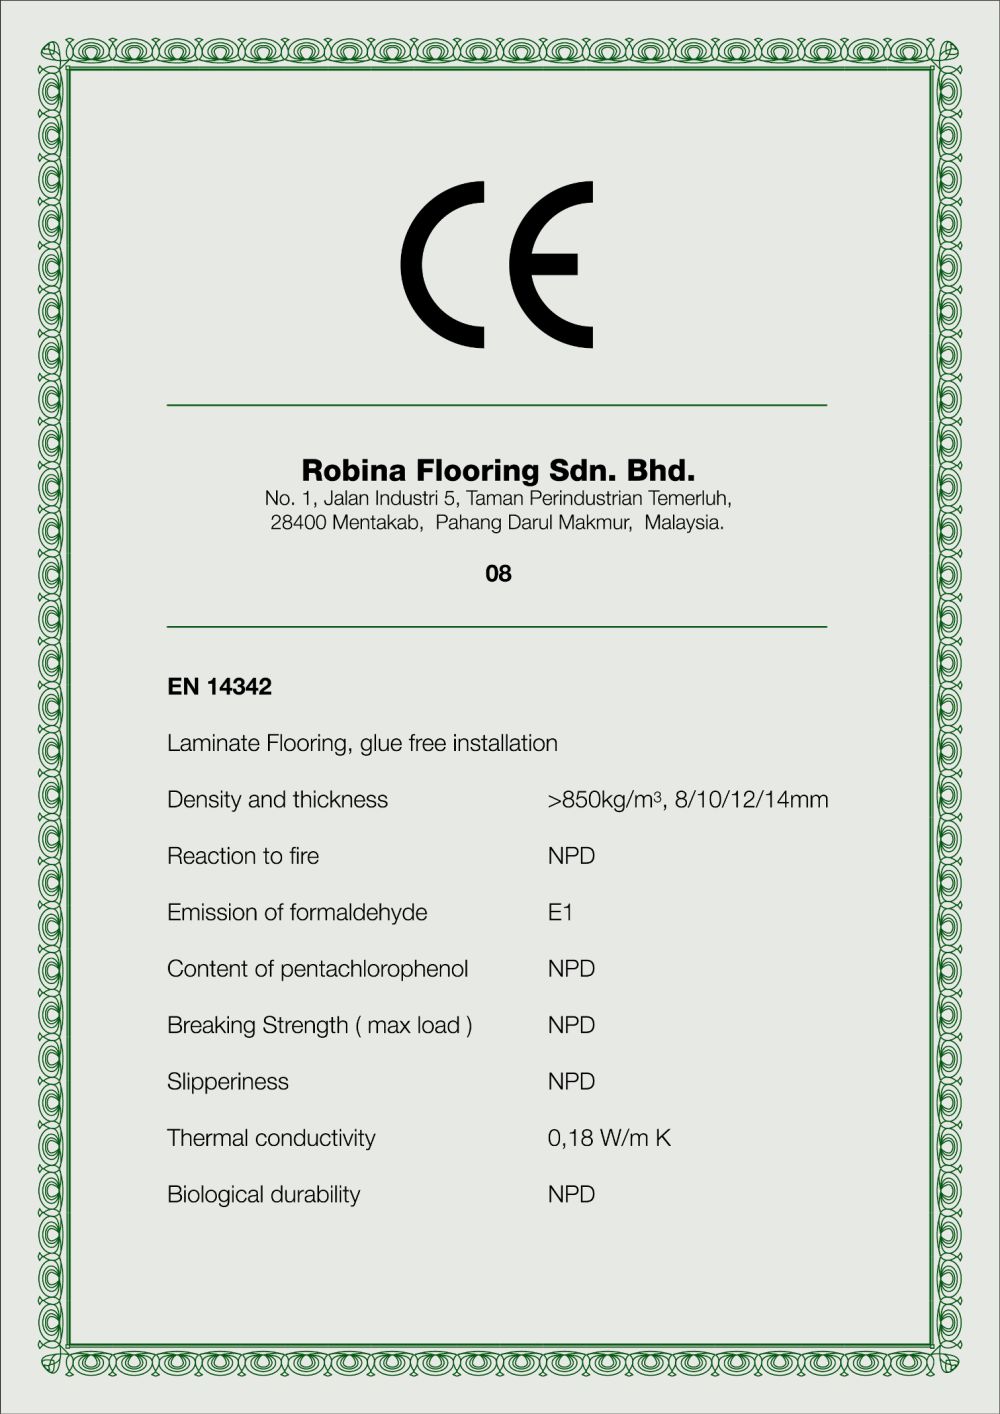 chung-chi-tested-to-comply-with-ce-marking